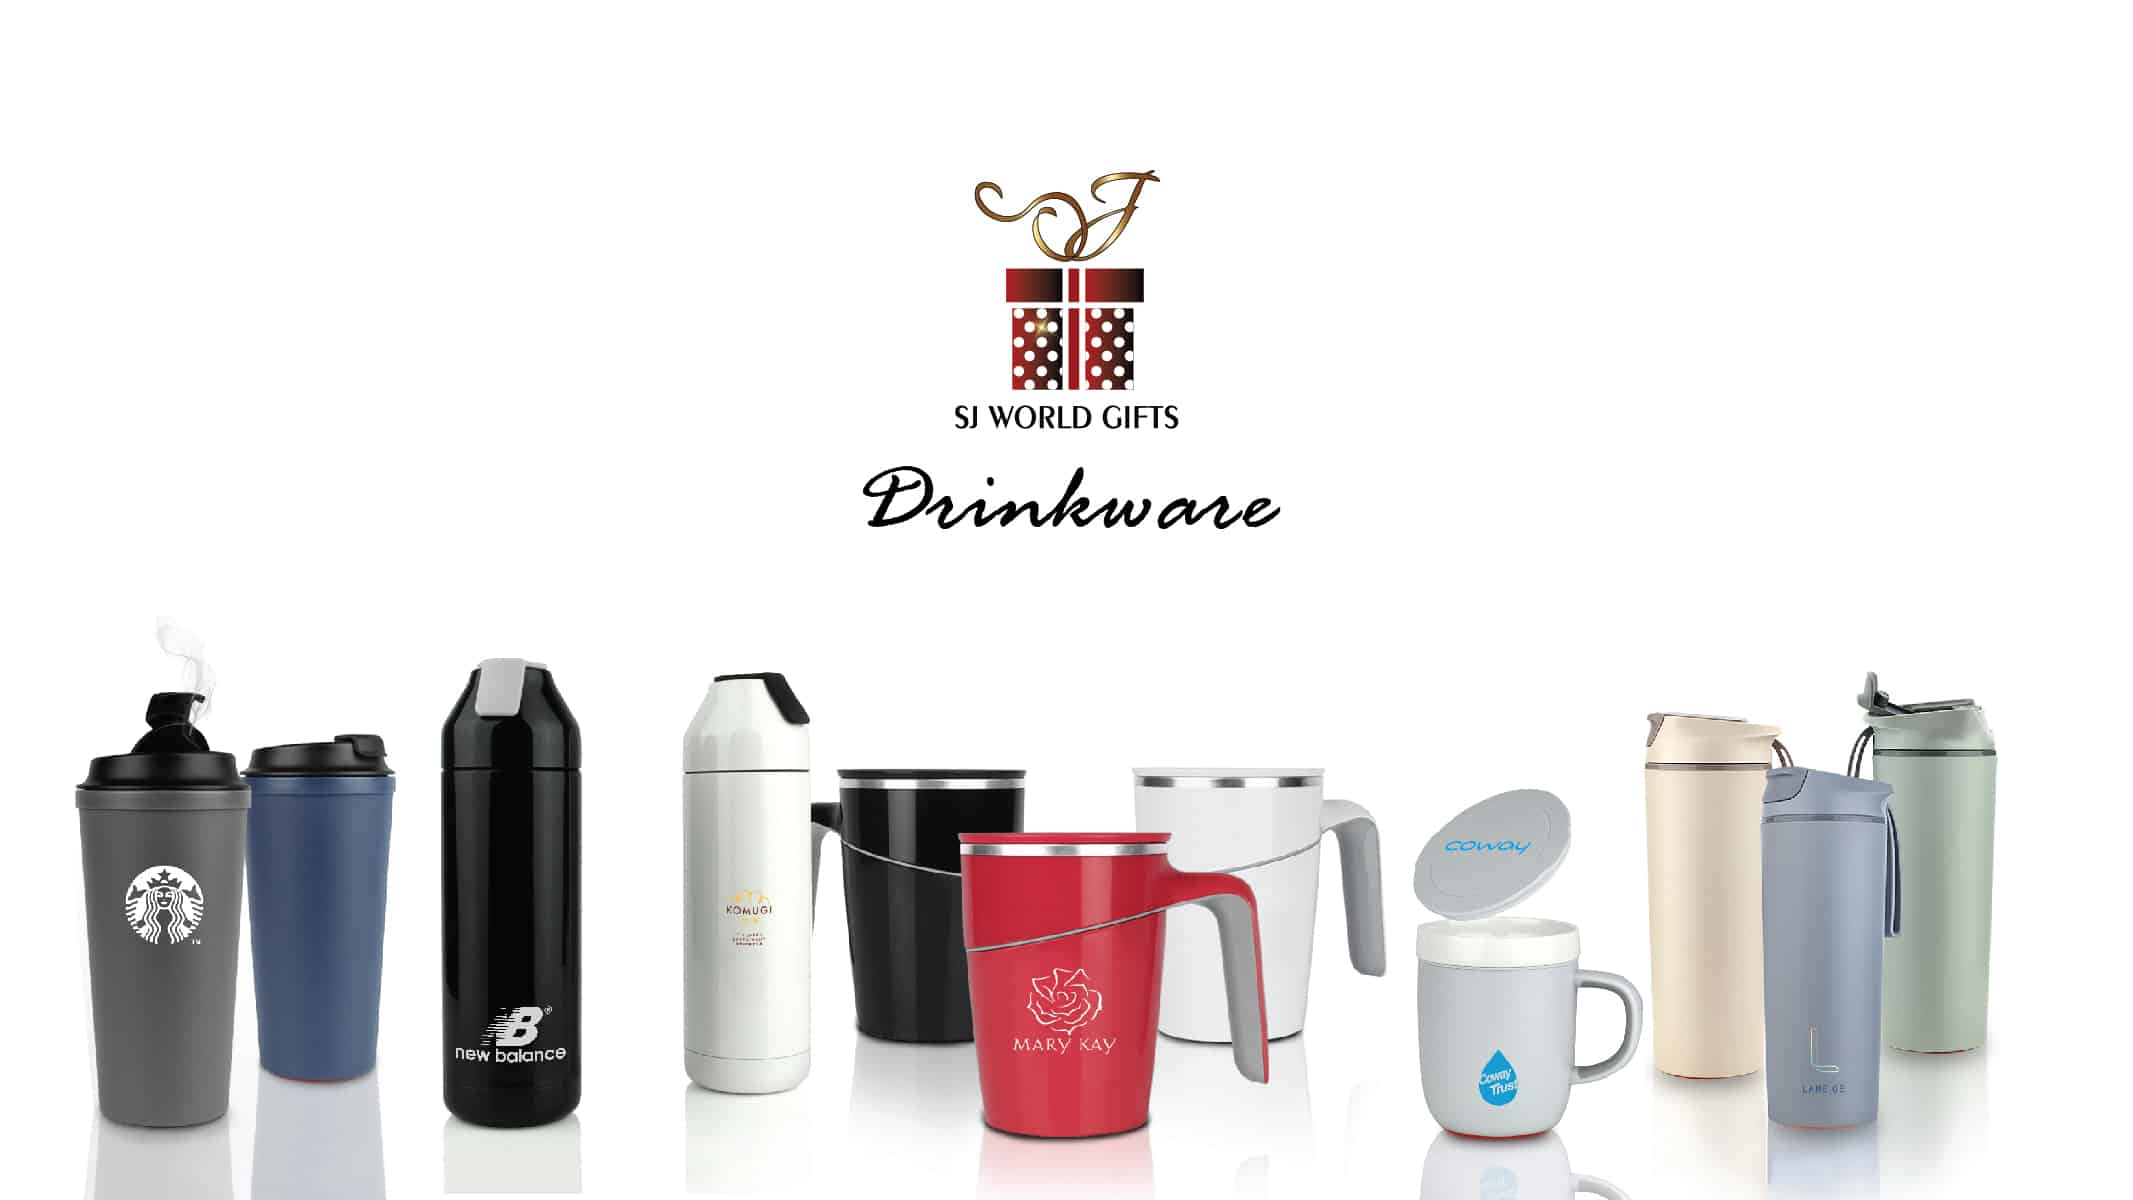 Drinkware Supplier Malaysia at SJ-World Gifts Malaysia | Premium Gifts, Corporate Gifts and Door Gifts Malaysia Supplier